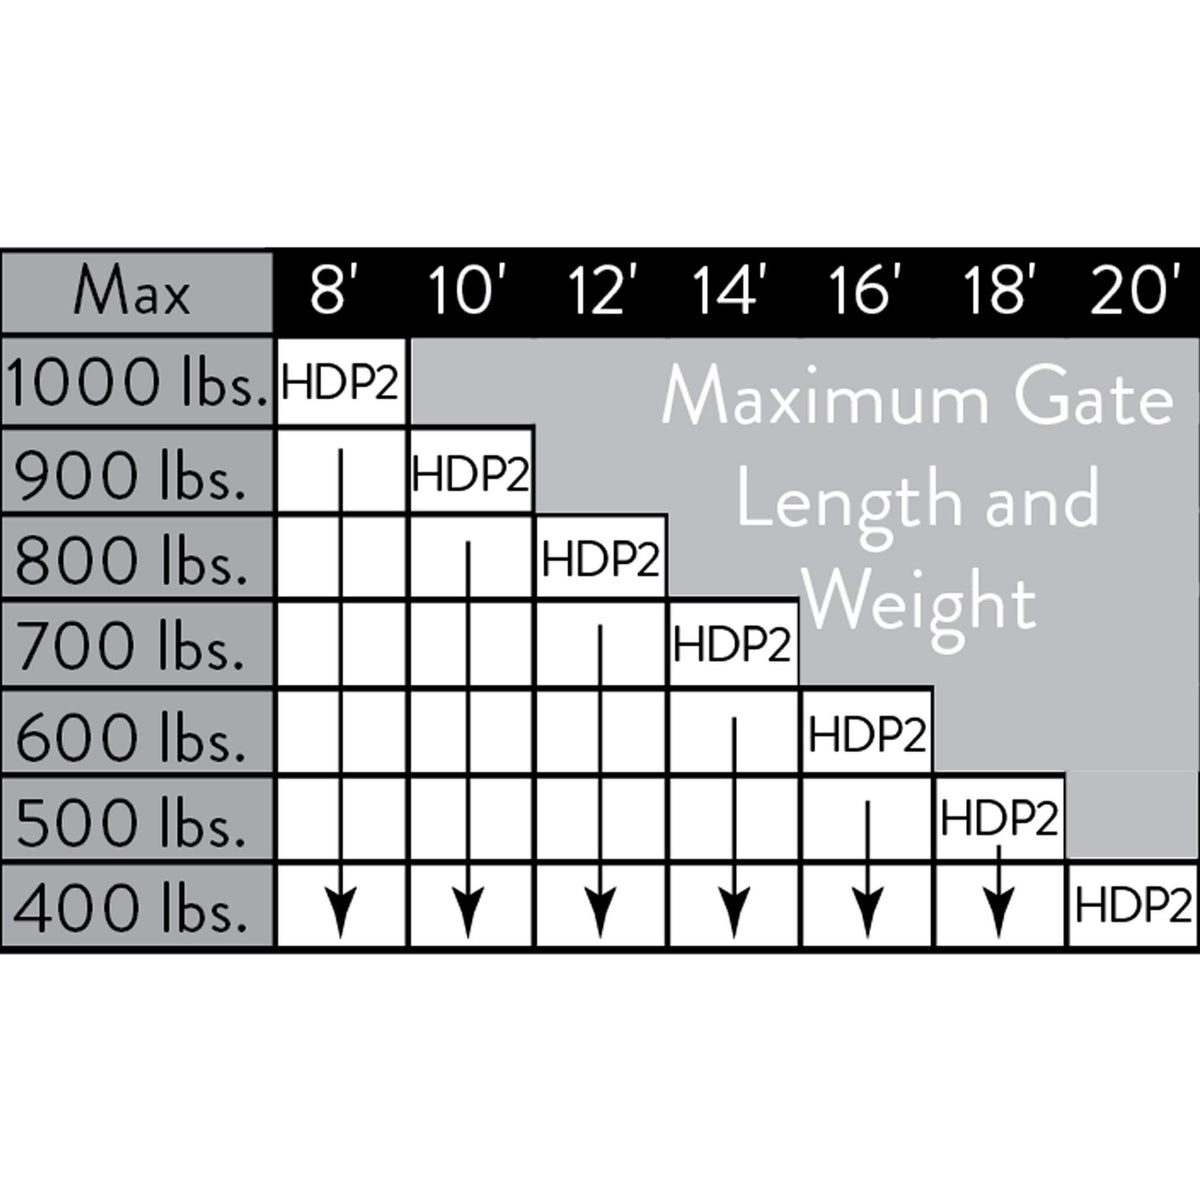 graduated weight scale for automatic gate openers